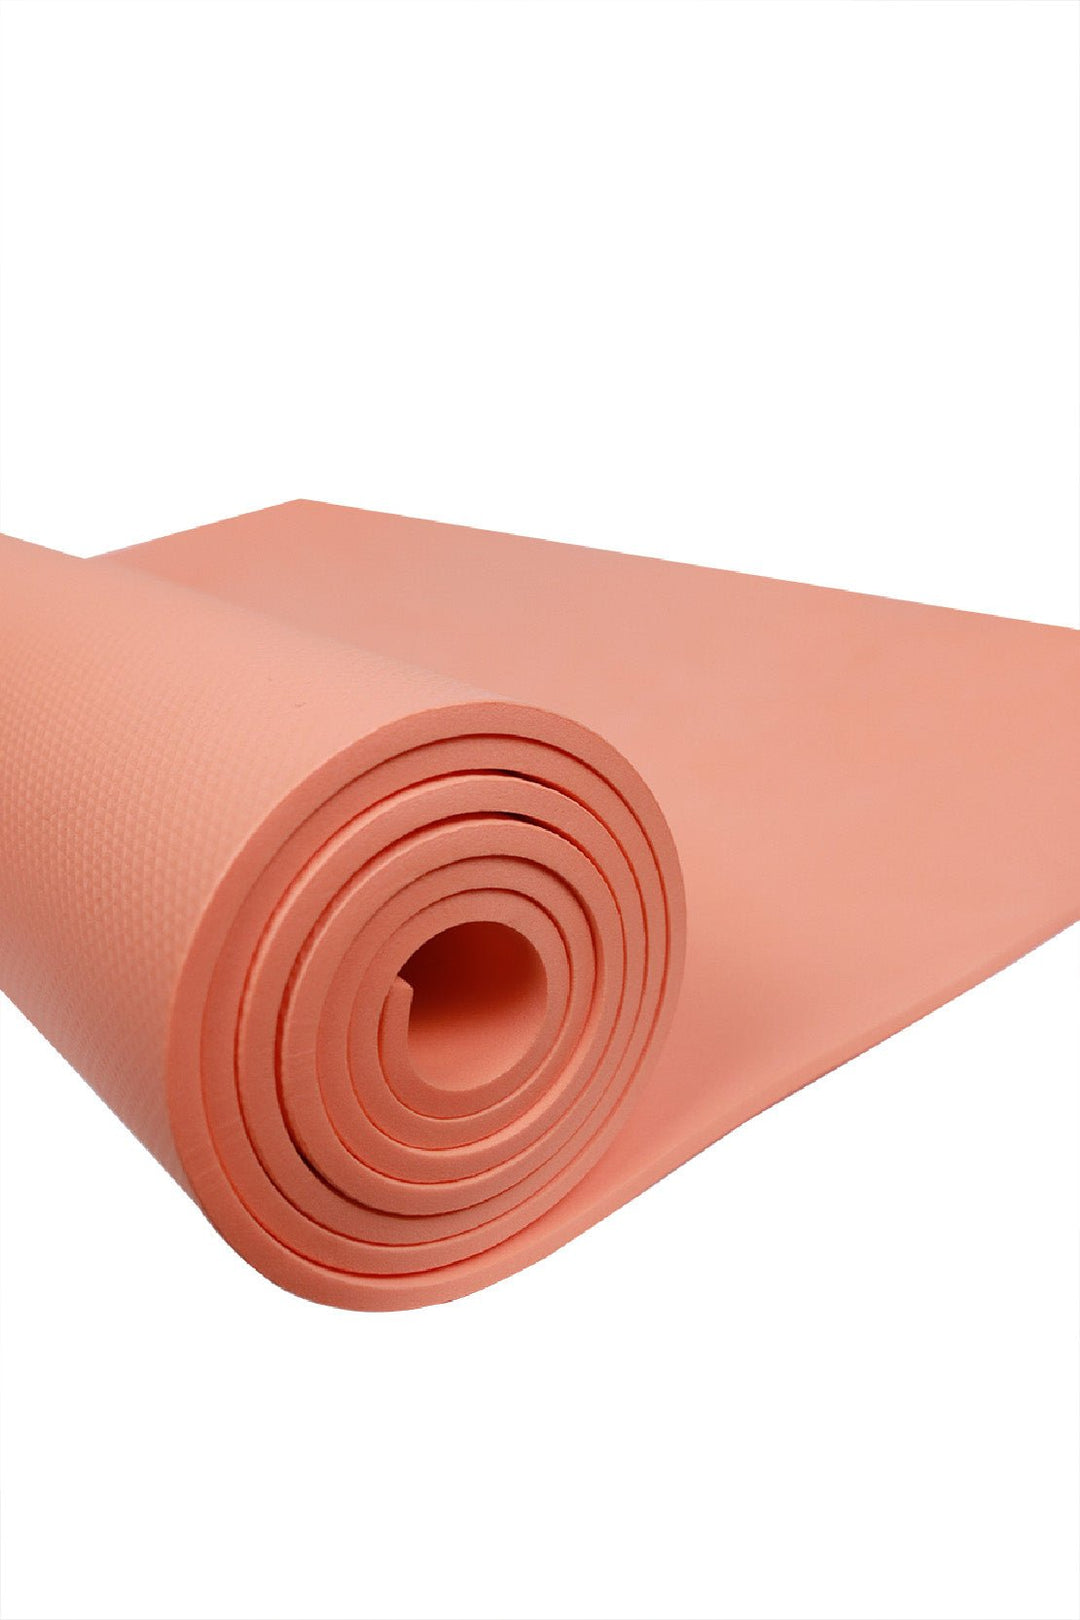 6 mm Thick Yoga Mat for Indoor and Outdoor Use, Pink - V Surfaces